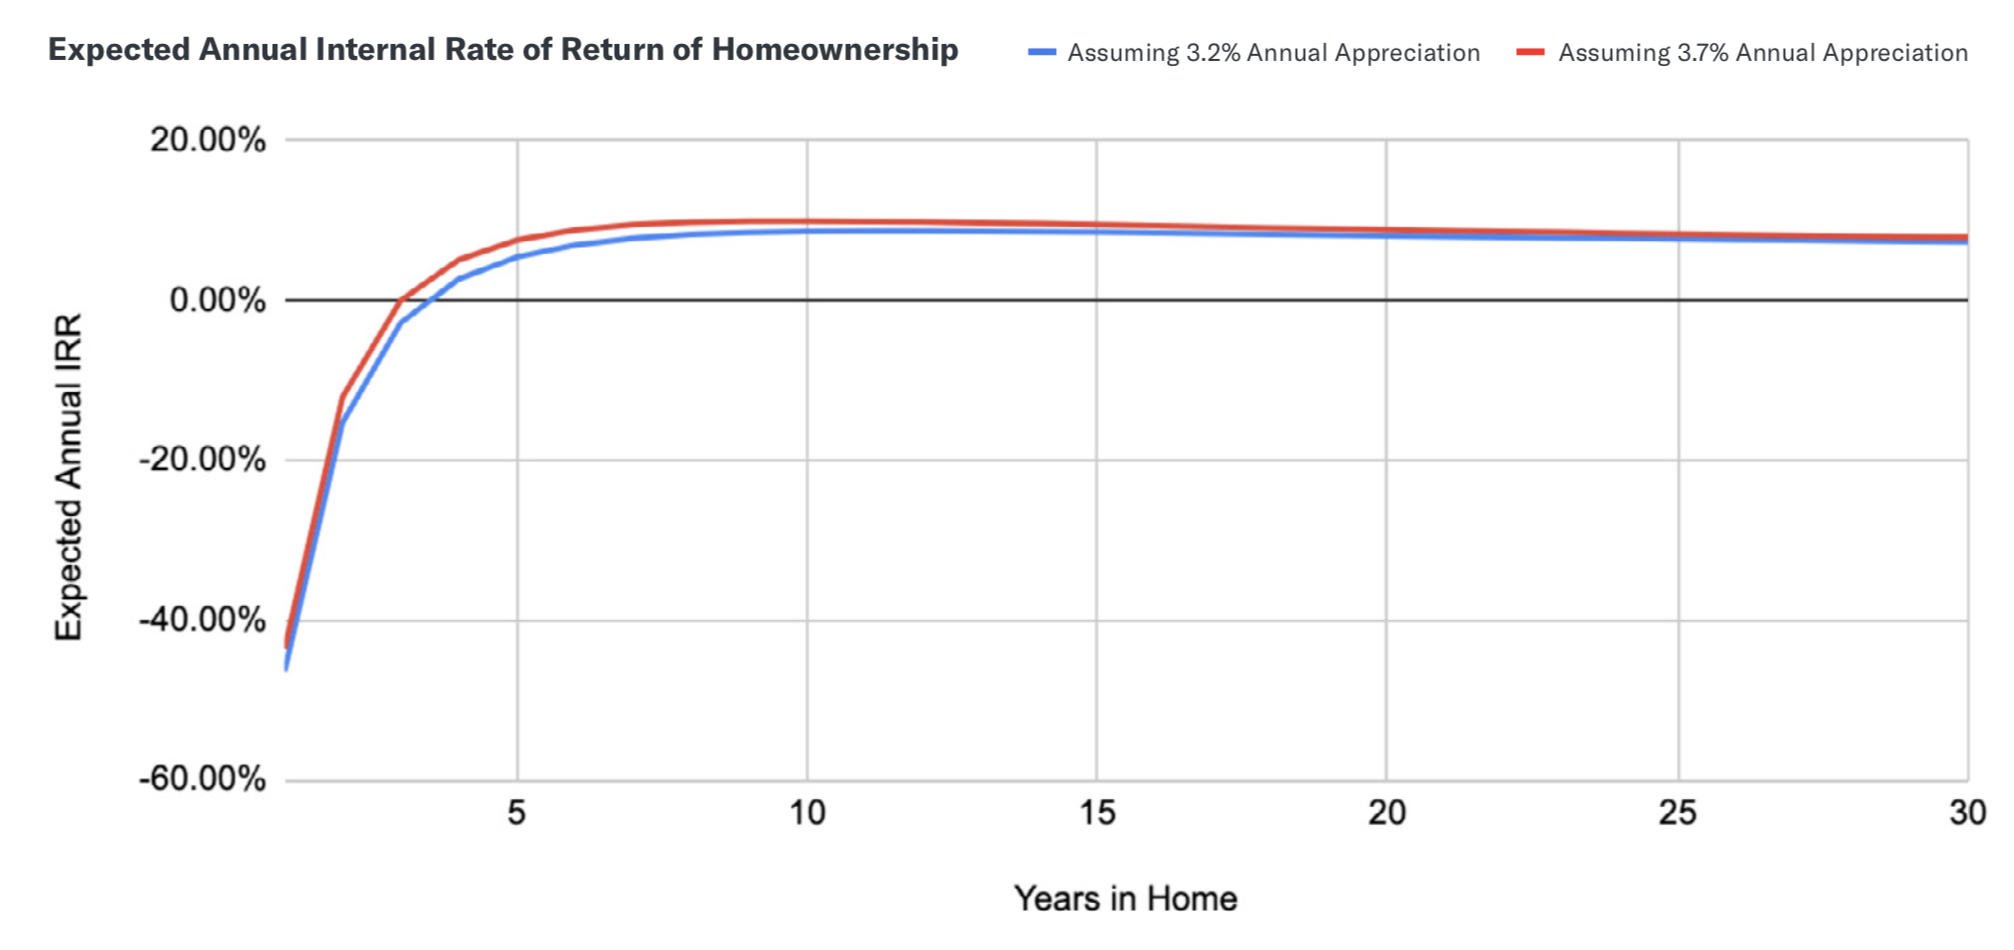 Expected Annual Internal Rate of Return of Homeownership